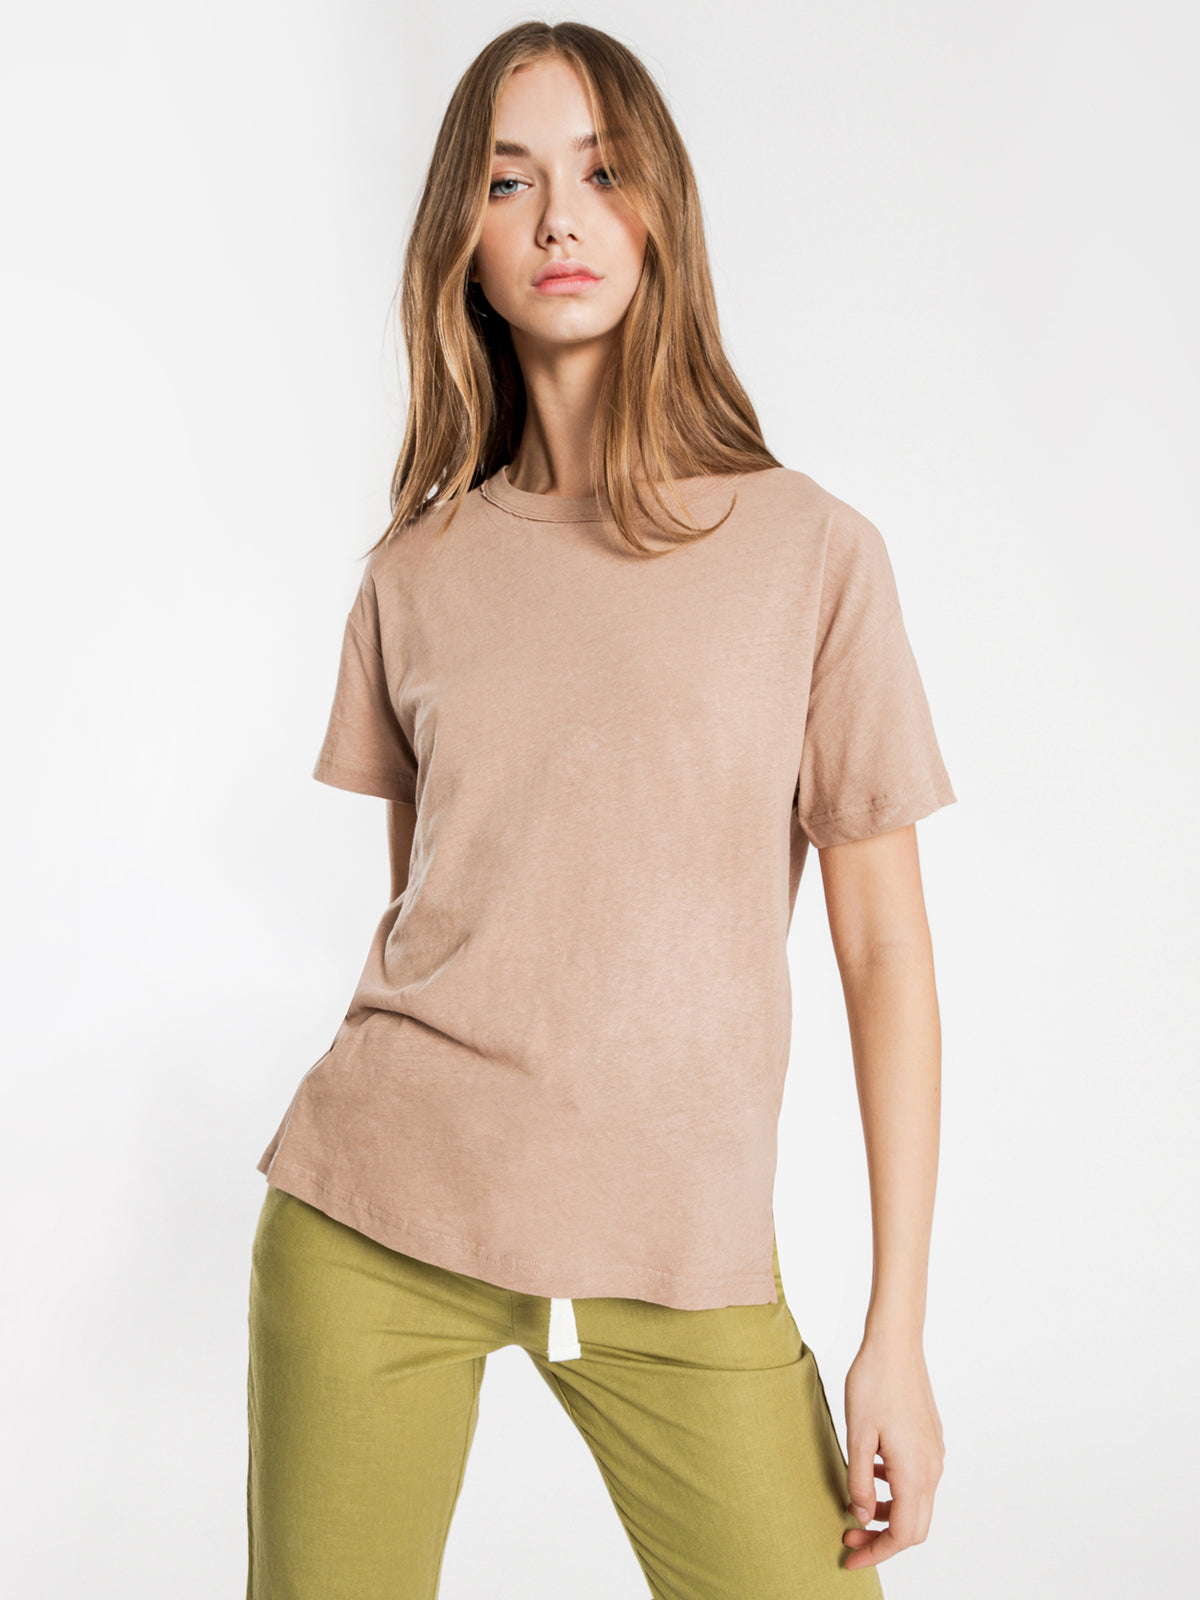 Atwood Slouchy T-Shirt in Mocha